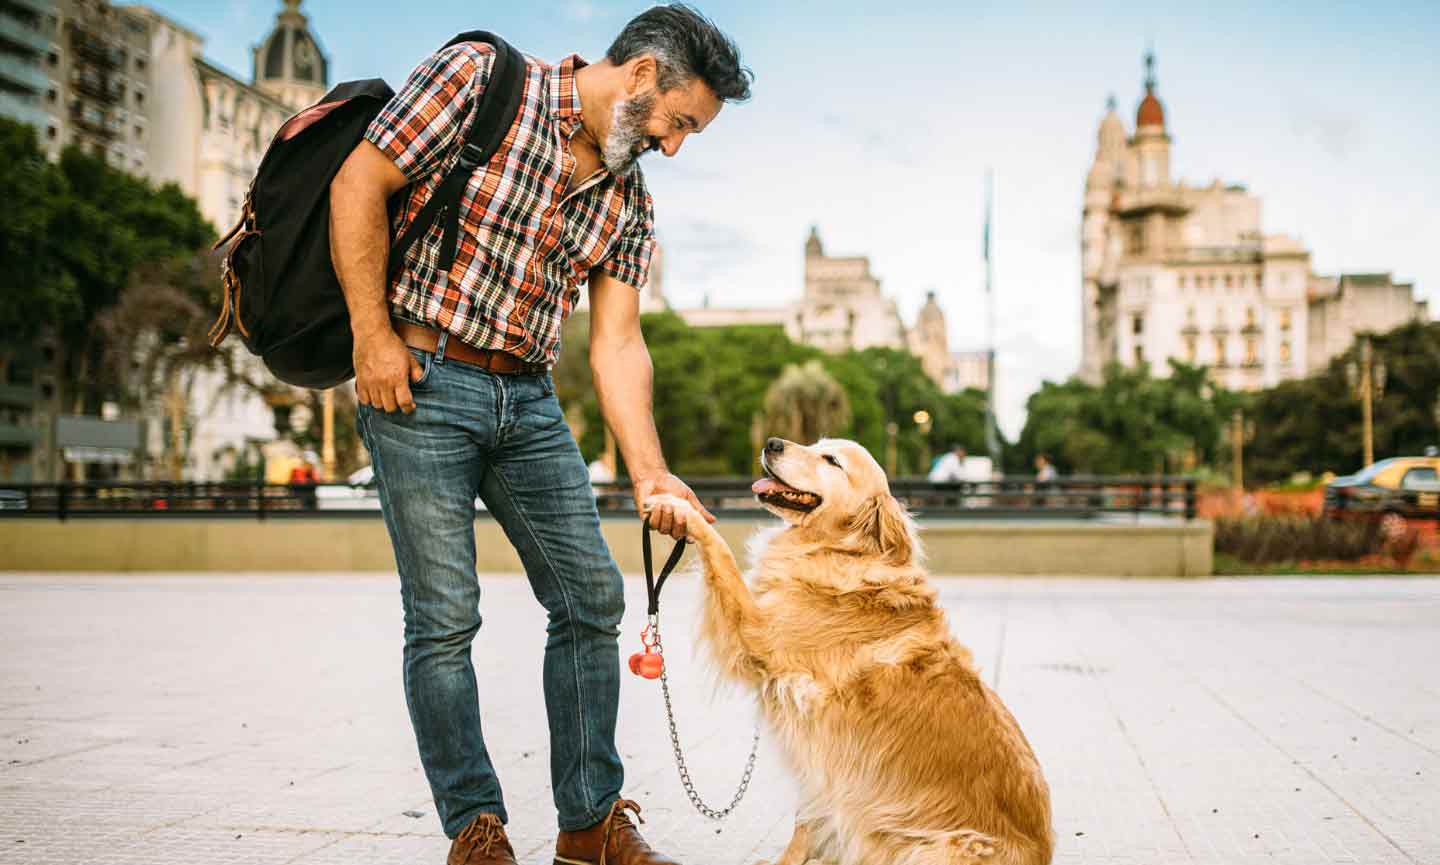 A Golden Retriever performing the "shake" command with a man in an outdoor urban setting